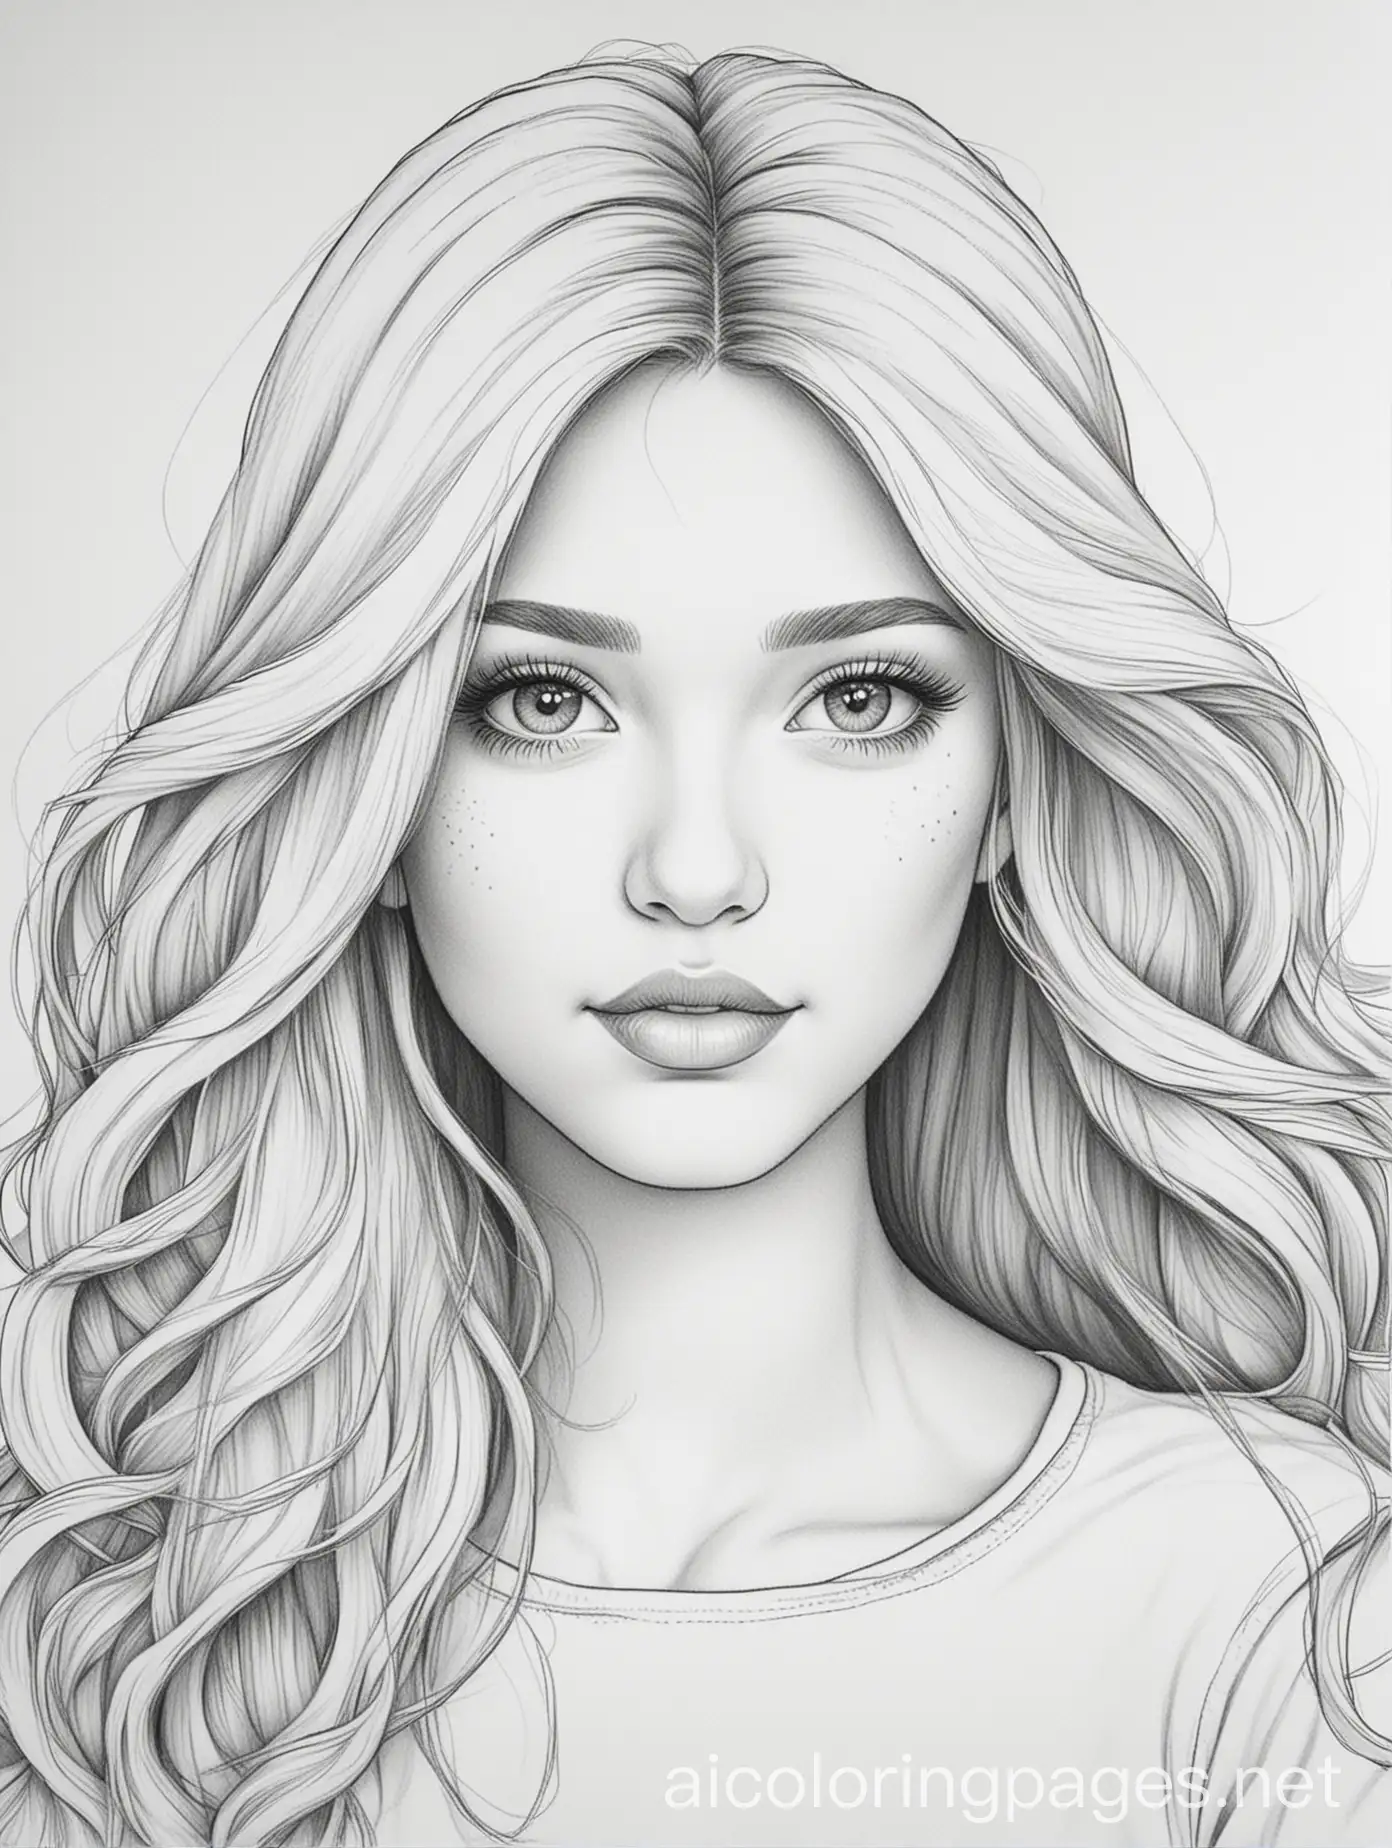 Girl with very rich hair, Coloring Page, black and white, line art, white background, Simplicity, Ample White Space. The background of the coloring page is plain white to make it easy for young children to color within the lines. The outlines of all the subjects are easy to distinguish, making it simple for kids to color without too much difficulty